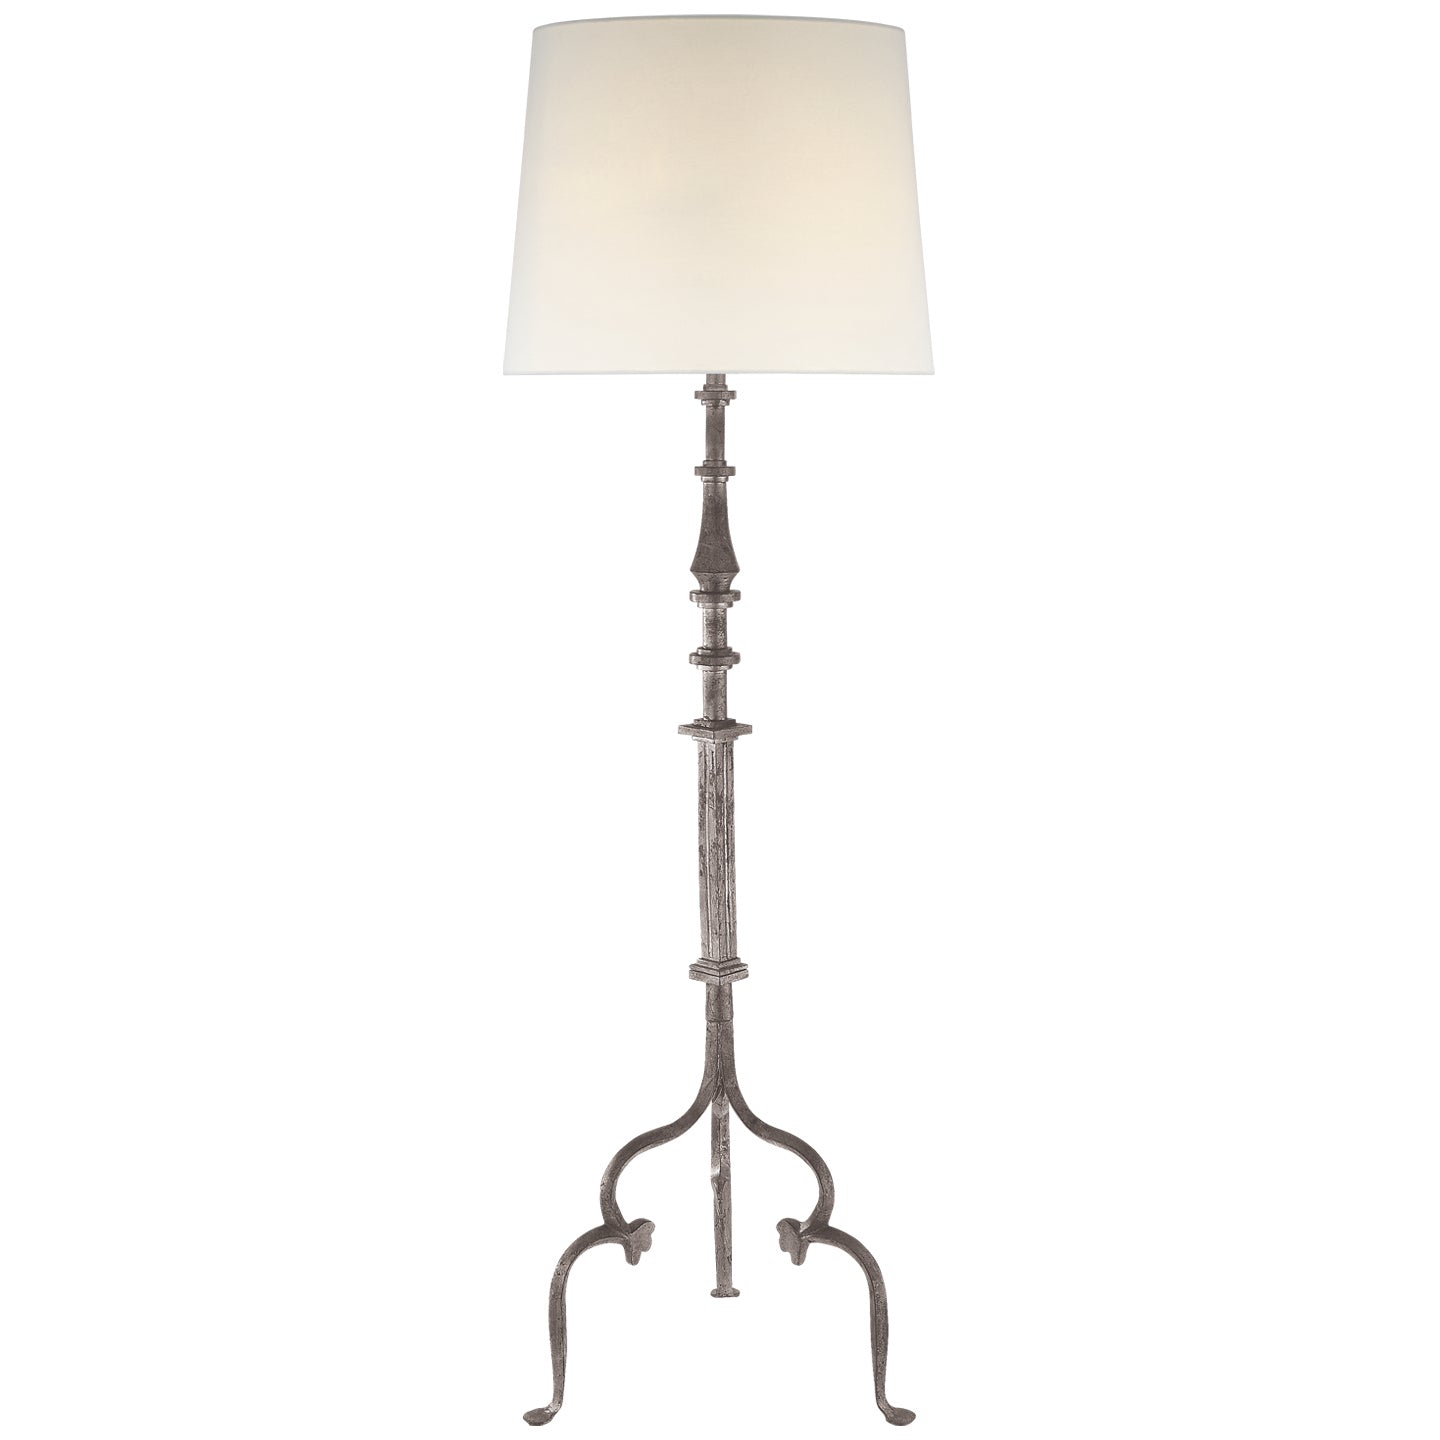 Load image into Gallery viewer, Visual Comfort Signature - SK 1505BW-L - One Light Floor Lamp - Madeleine - Belgian White
